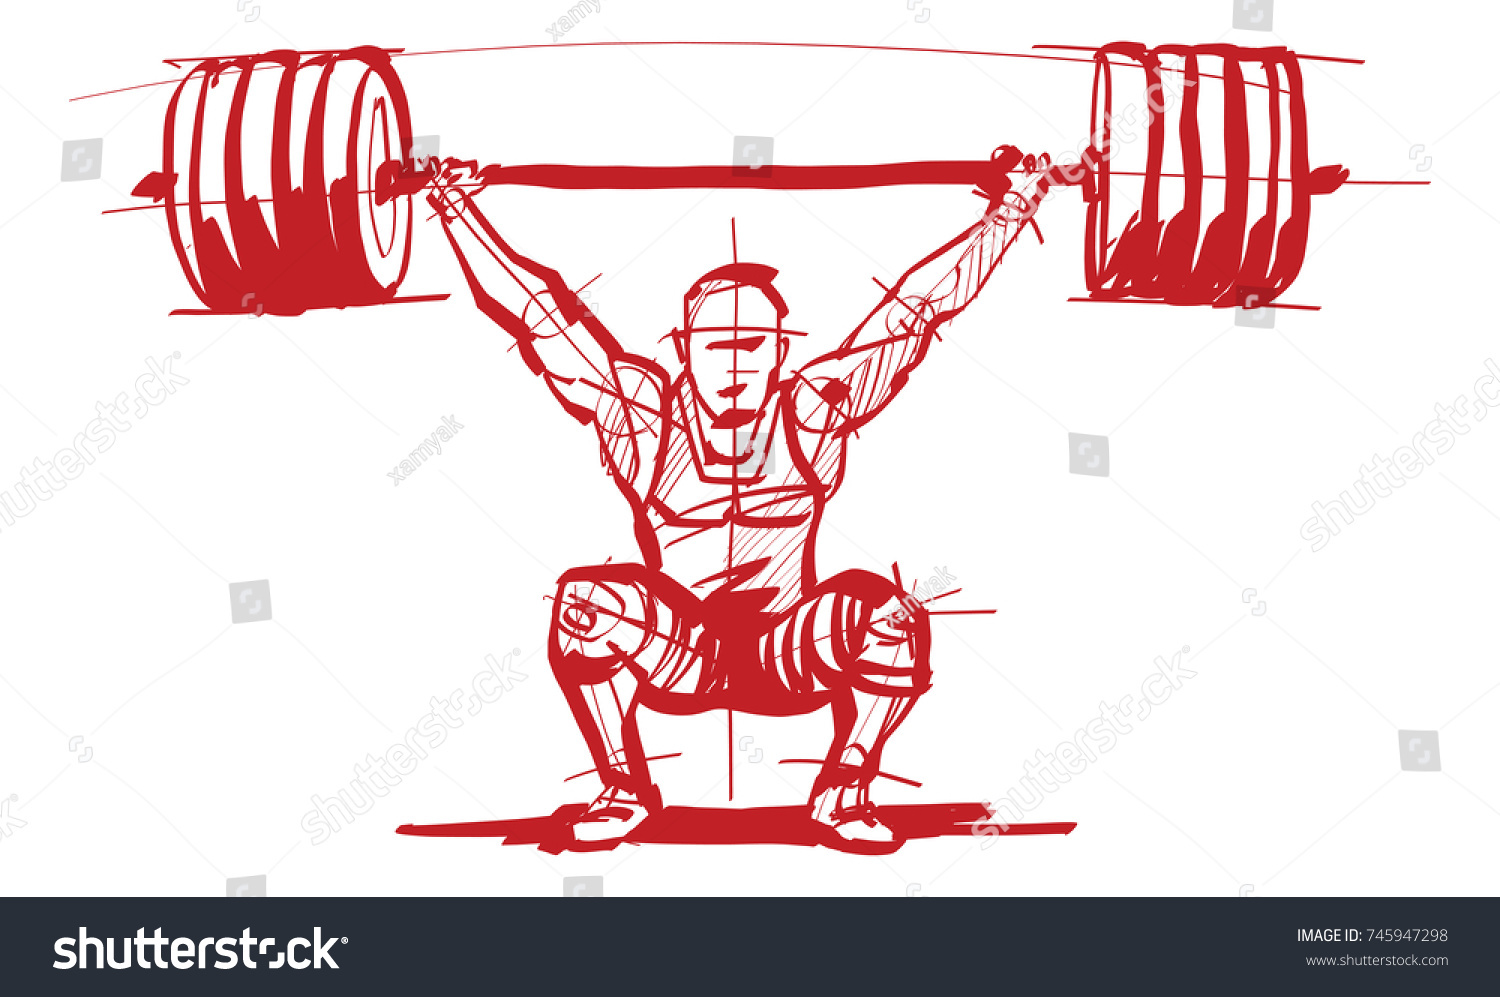 SVG of the athlete with a barbell in hand svg